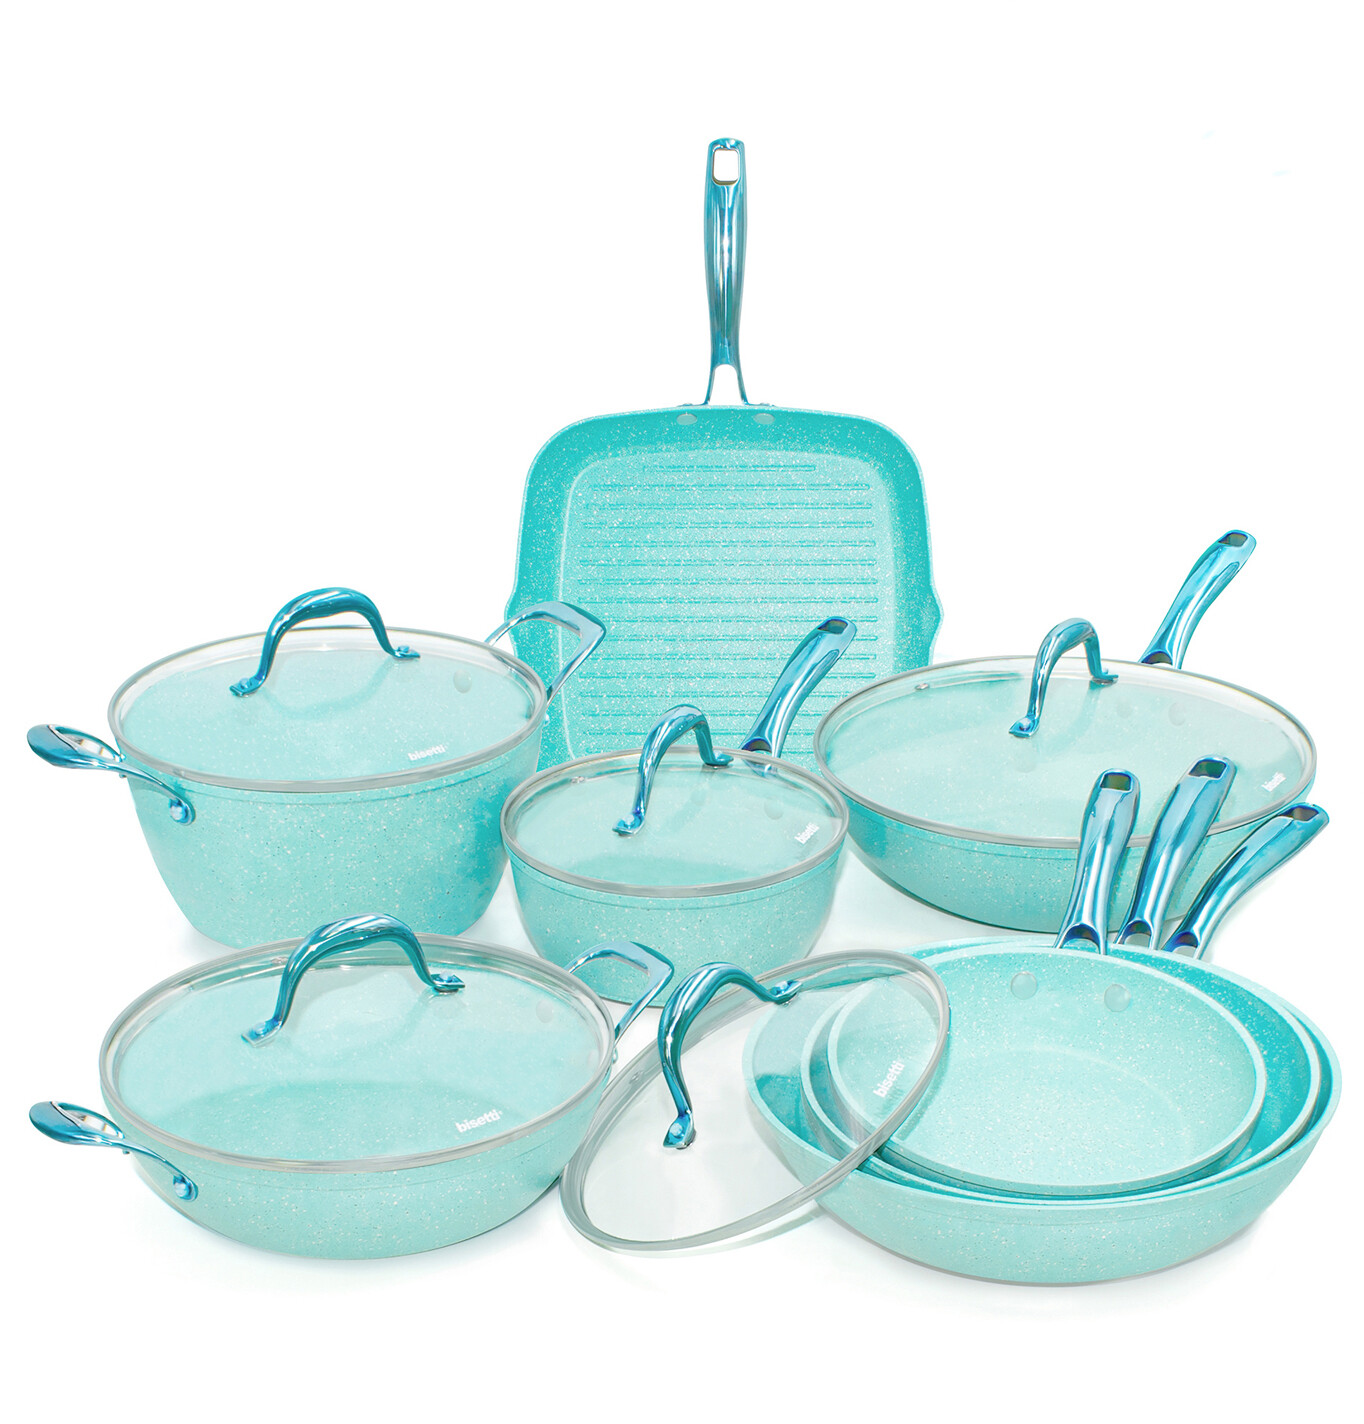 13 pieces cookware set 'Miss Gourmet' with turquoise colour handles